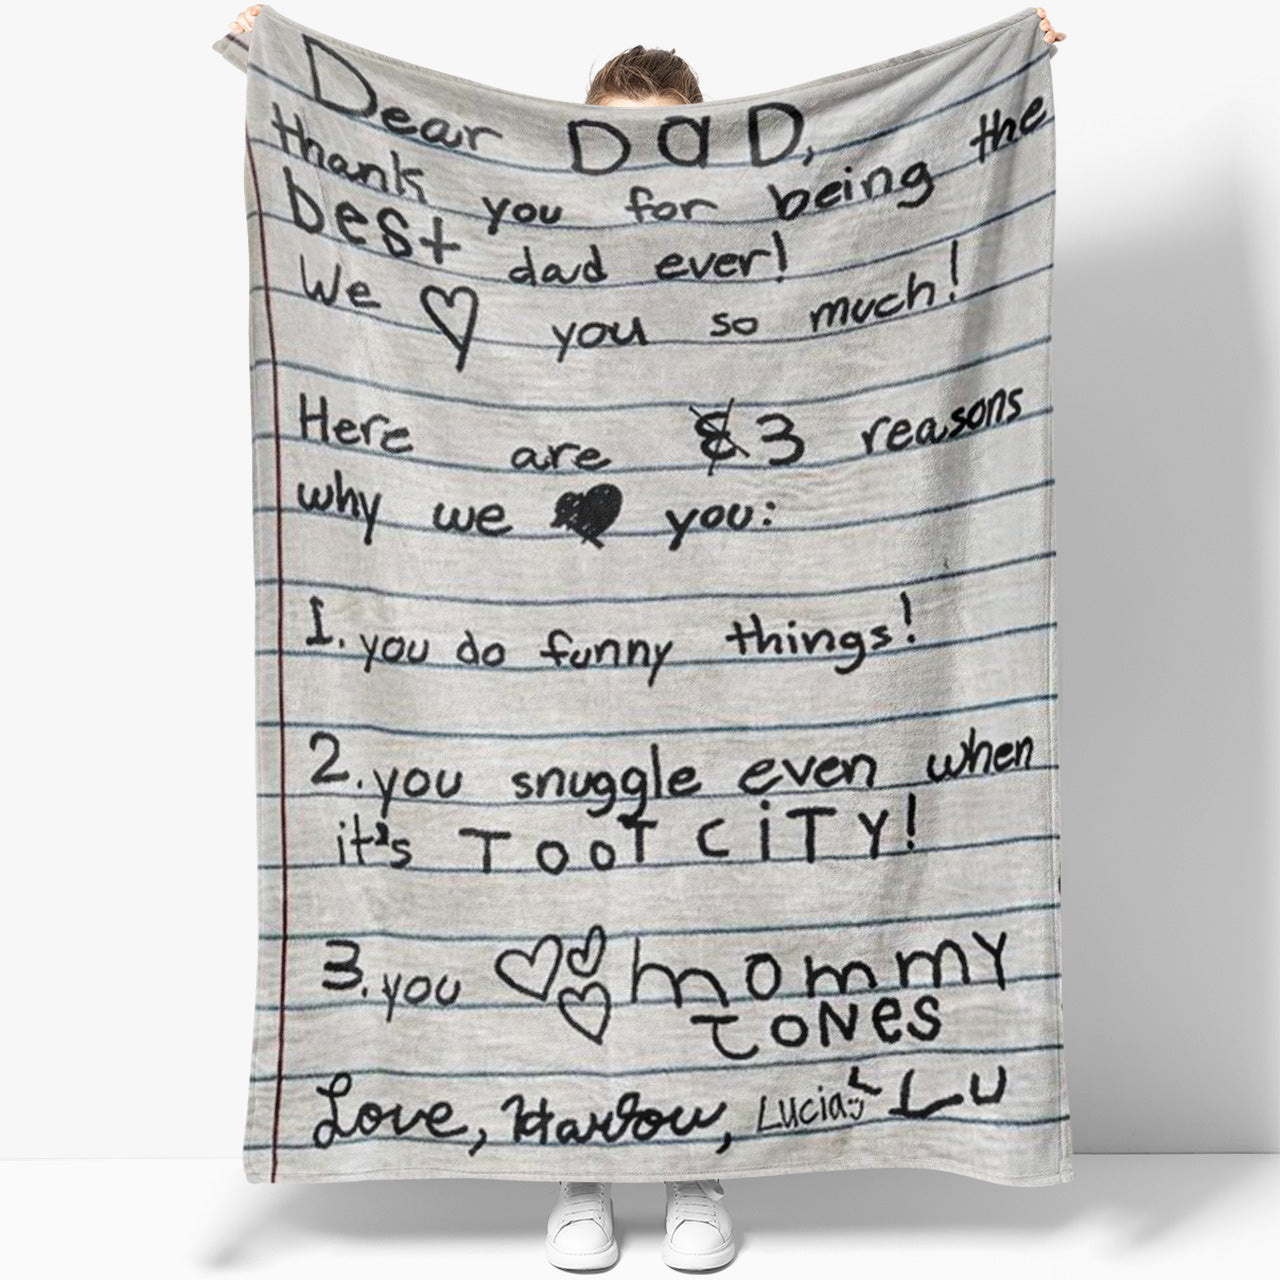 Love Letter Blanket for Dad, Personalized Throw Blanket